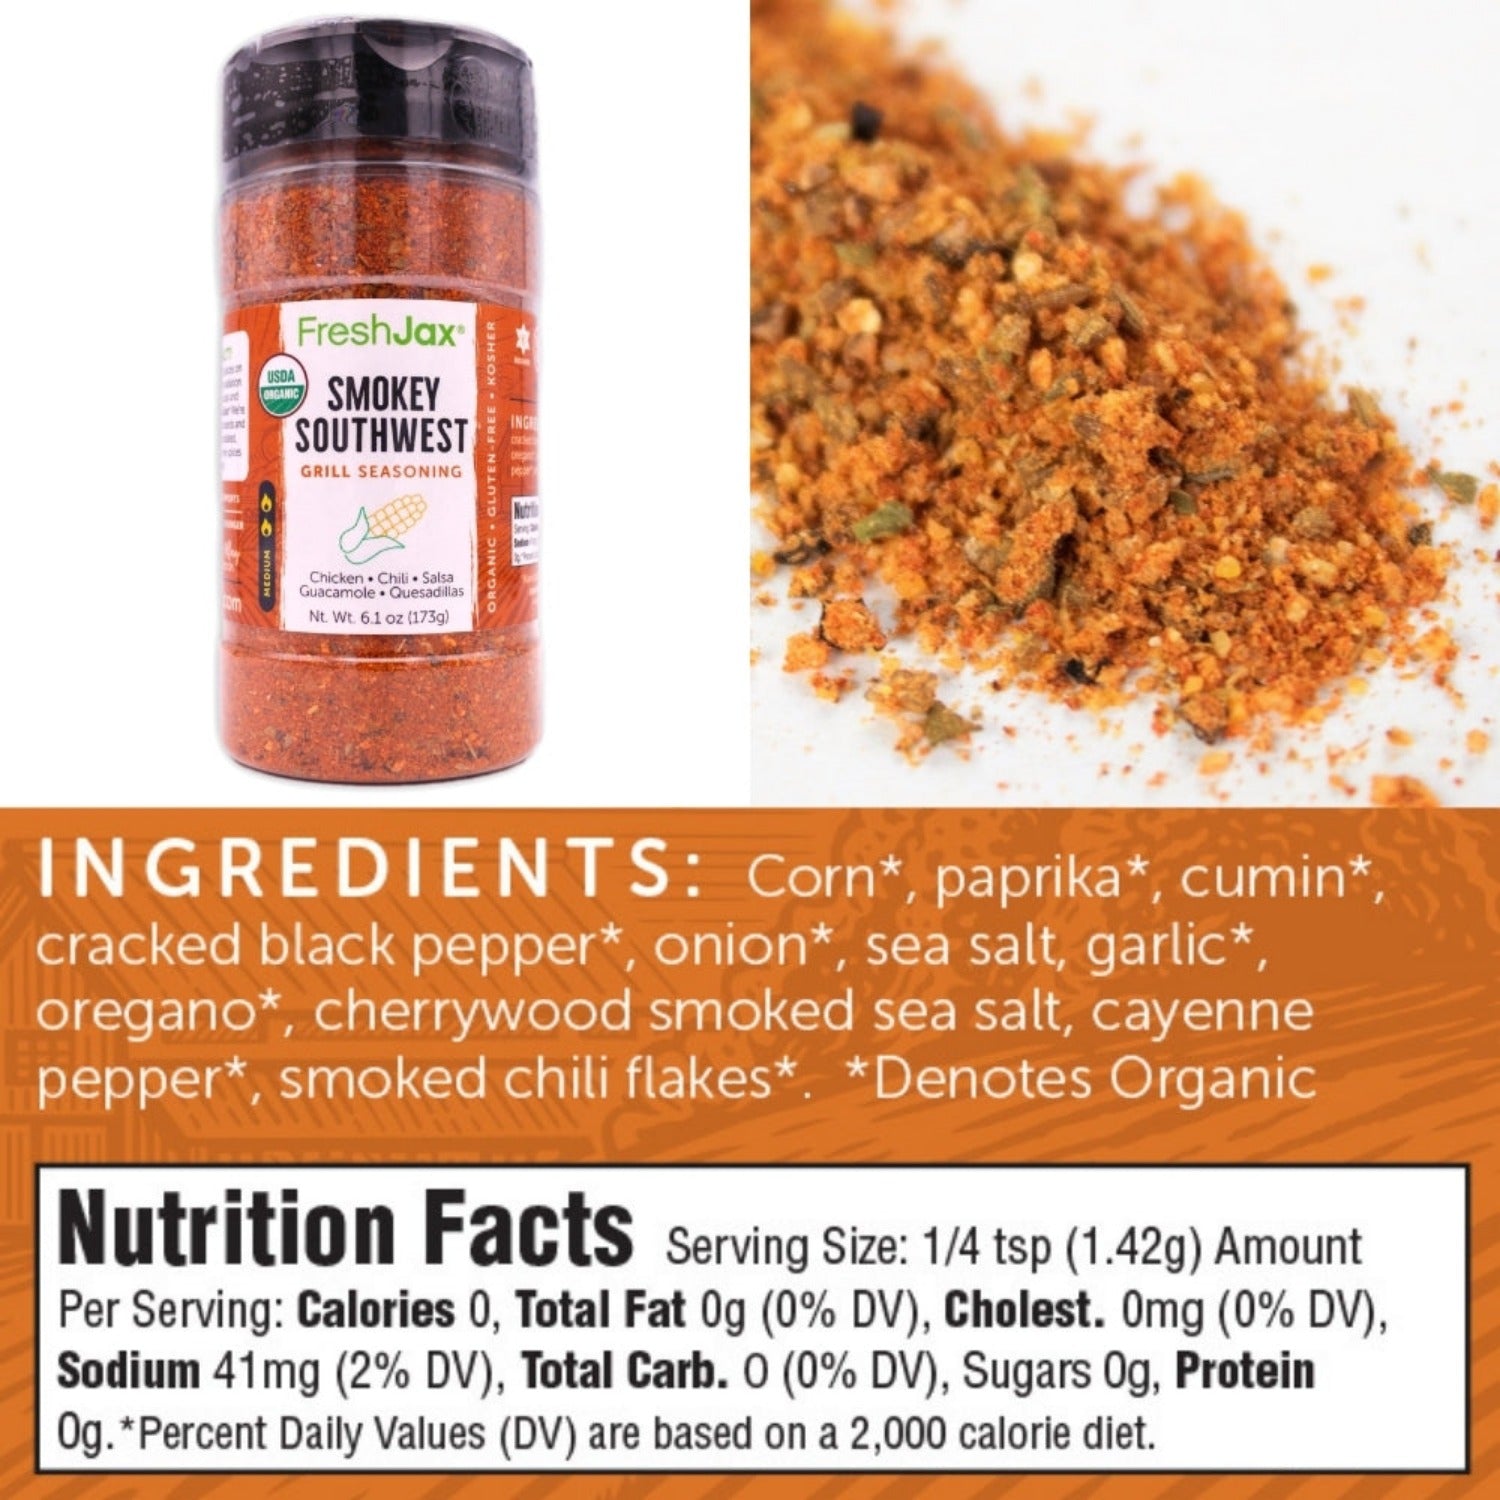 FreshJax Organic Spices Smokey Southwest Grill Seasoning Ingredients and Nutritional Information 